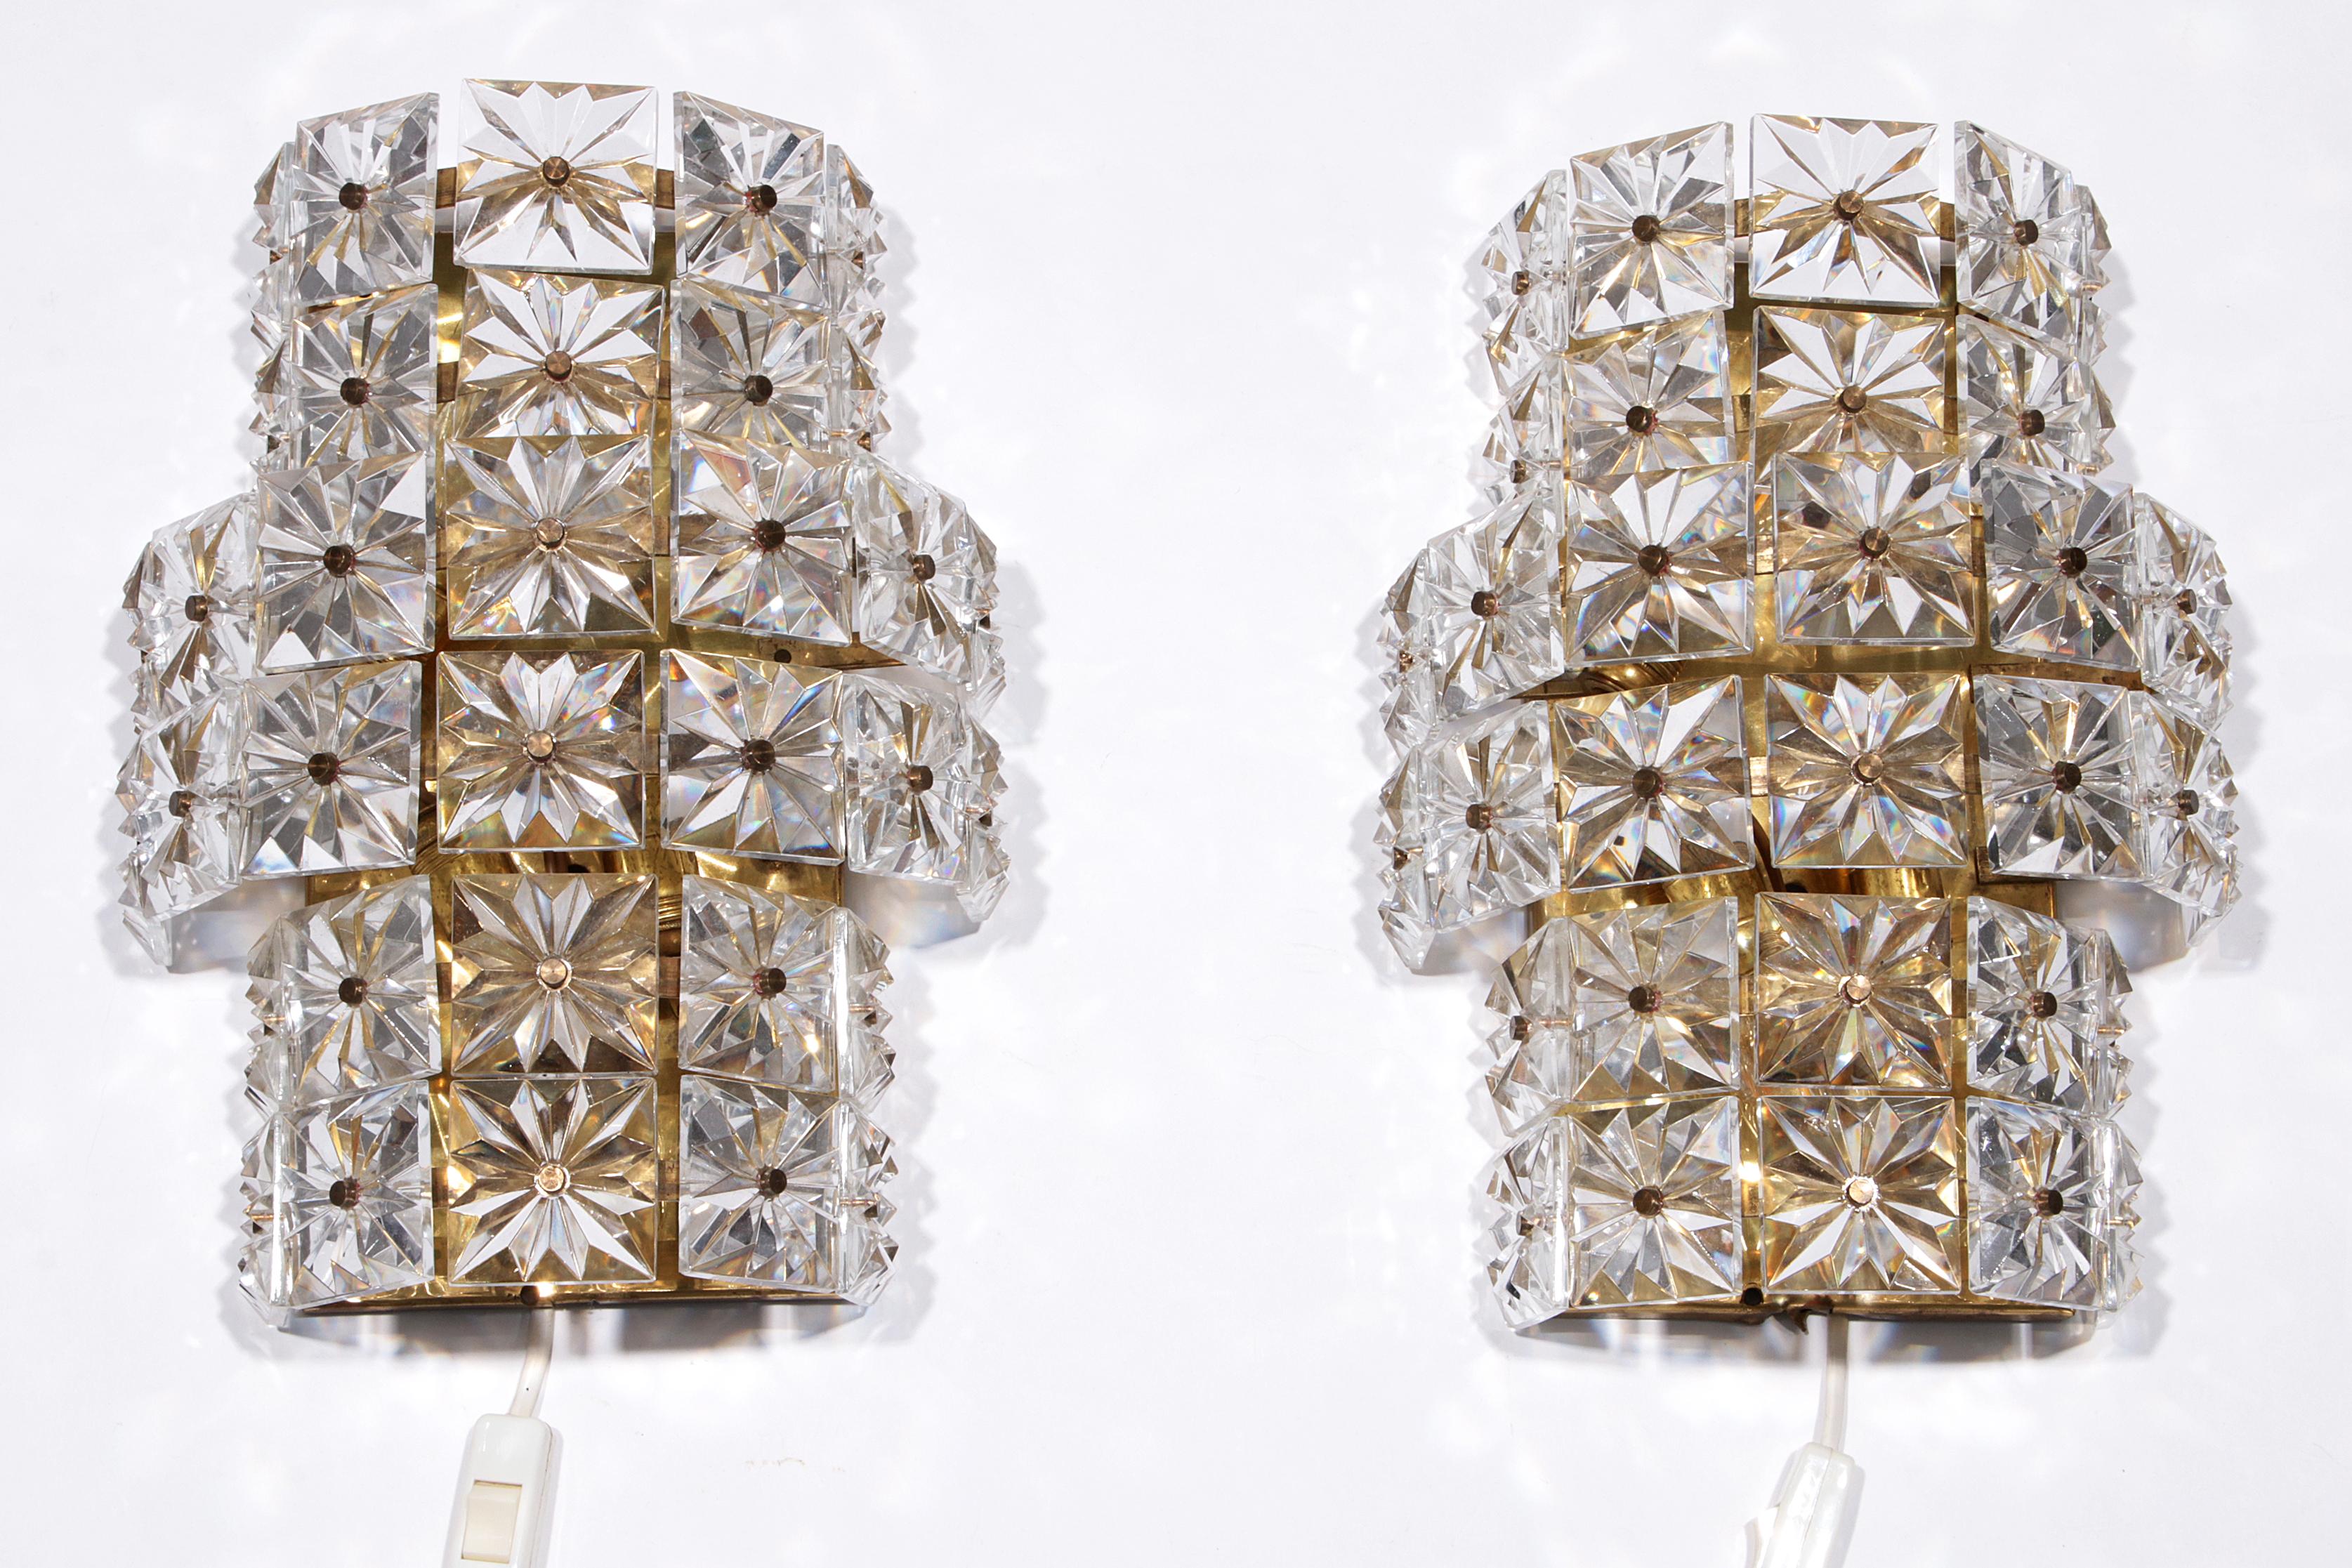 Mid-Century Modern Wall lamps Scandinavia set of 2, gold-colored with glass plates, 1960